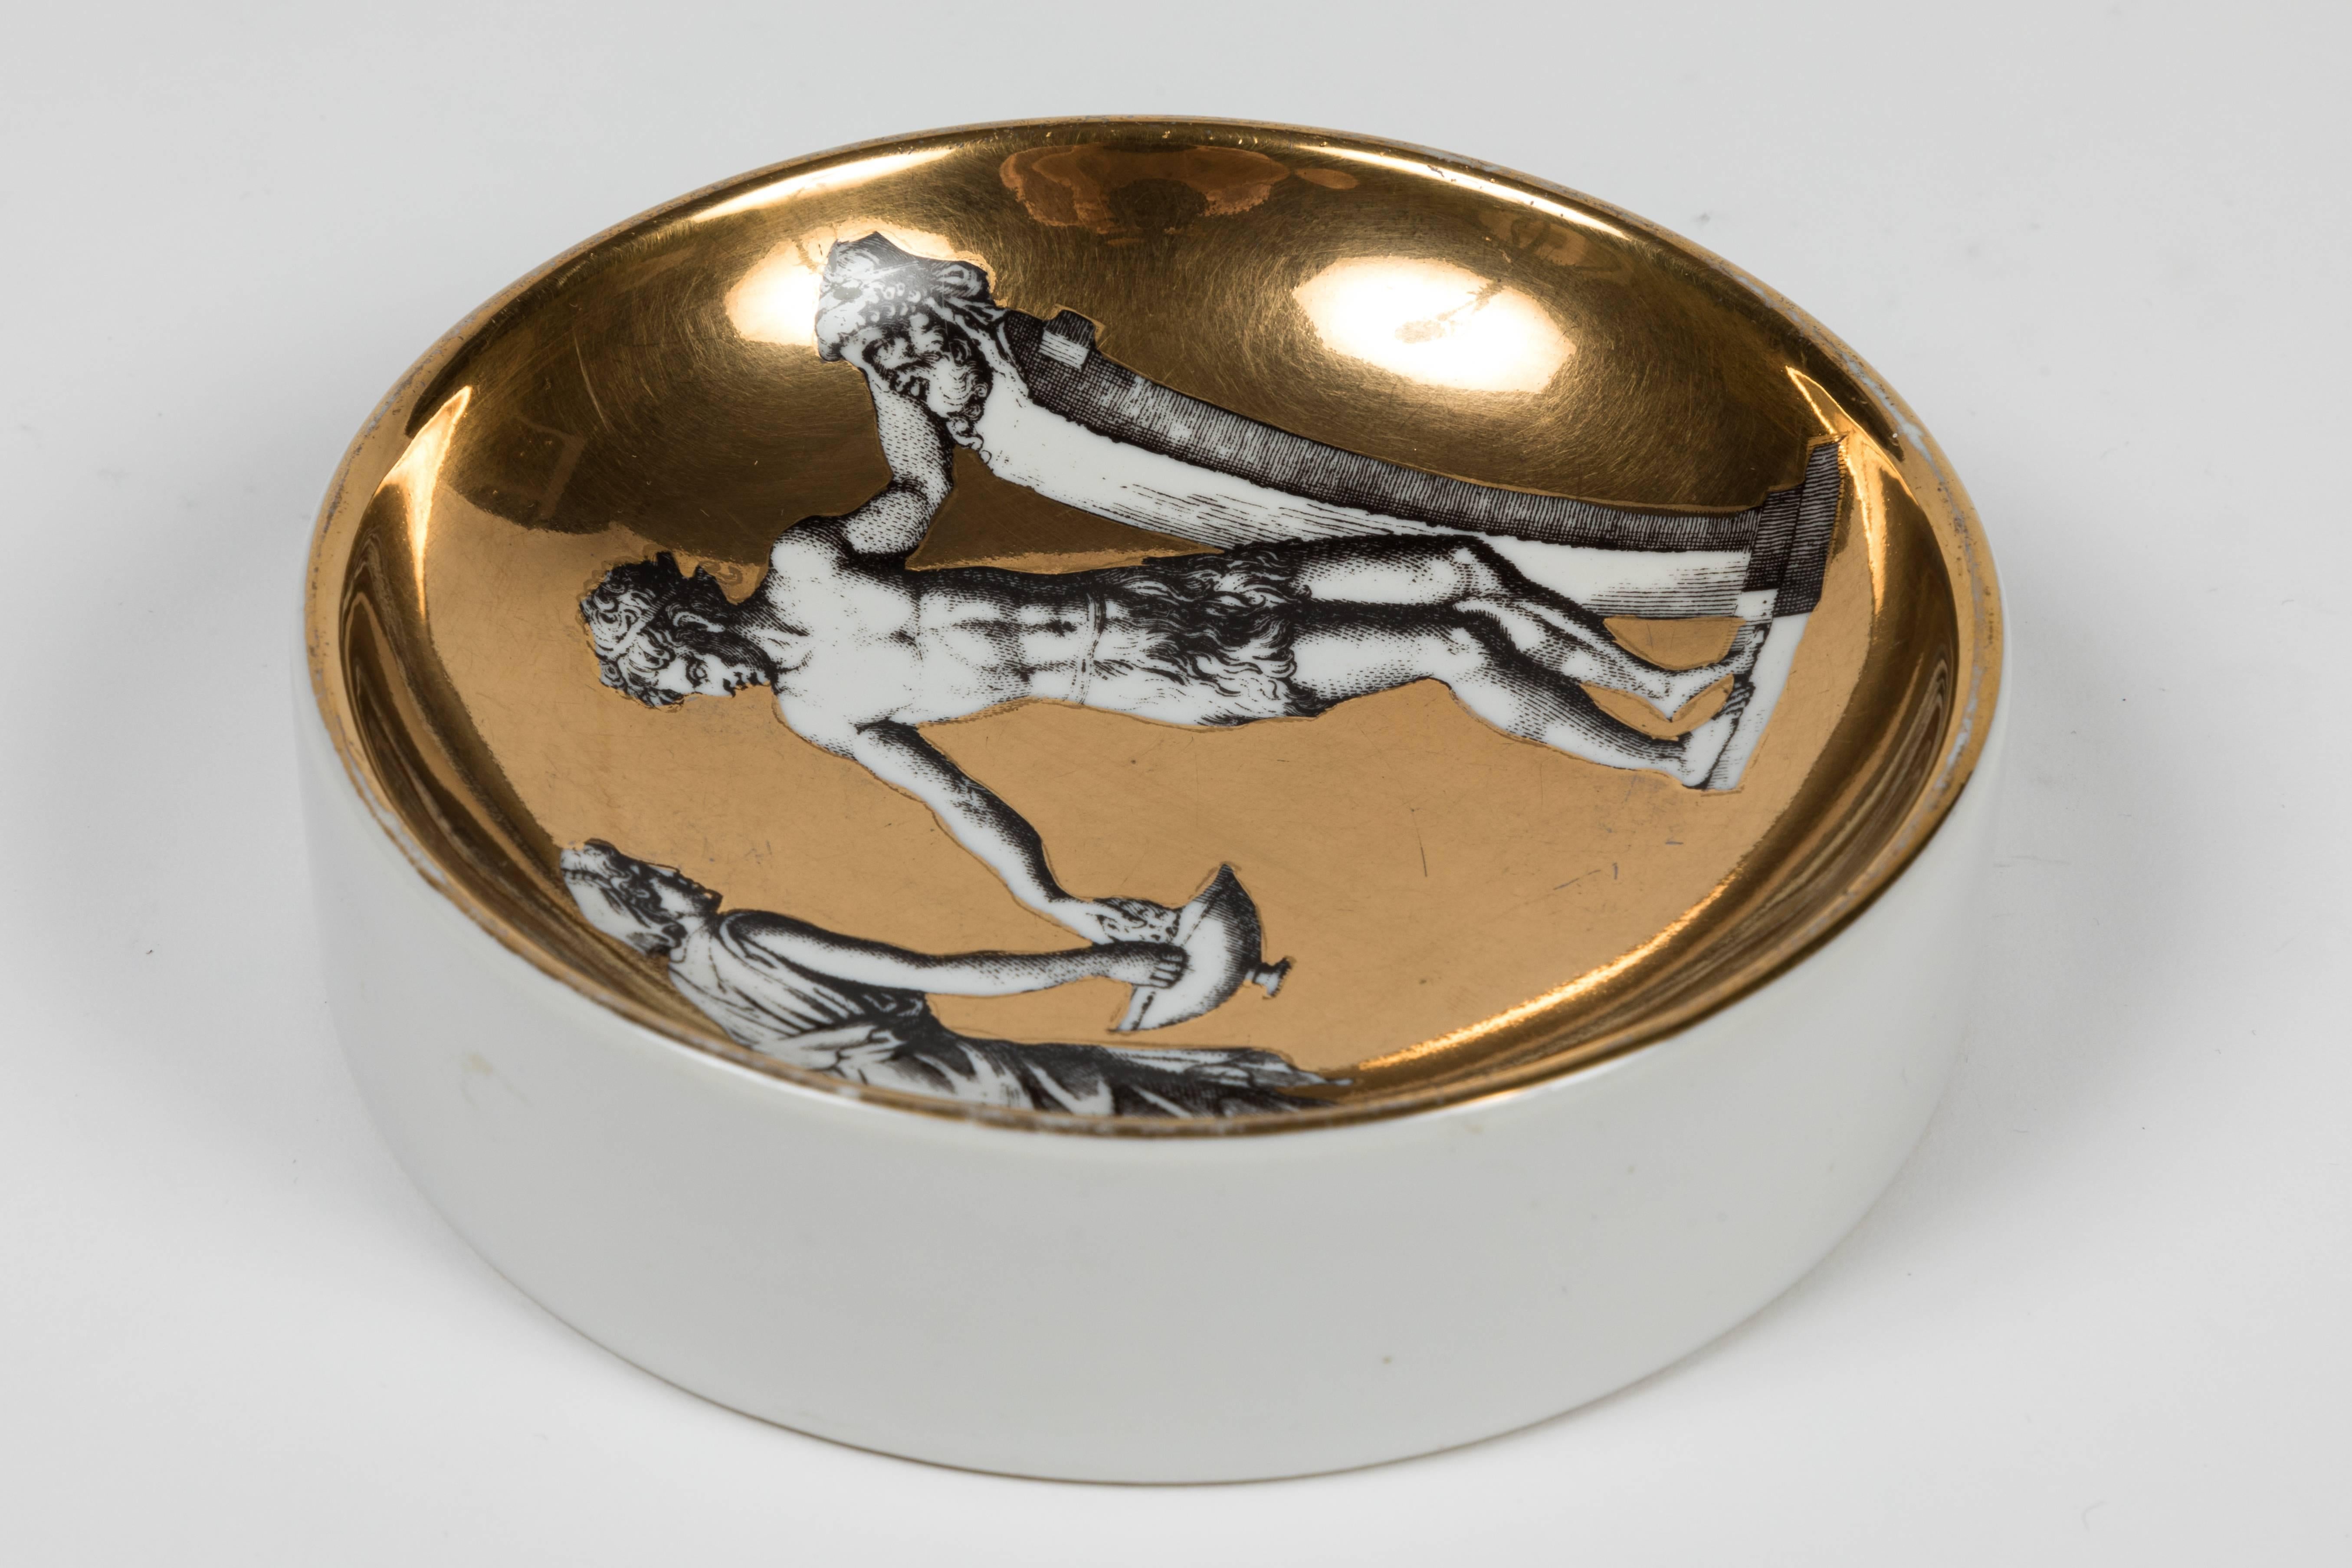 Vintage Fornasetti porcelain dish depicting two Roman figures. Could be used as a jewelry catch-all dish. A combination of gold glaze and black and white figures makes for a striking design.
Signed on the back.
Made in Italy.